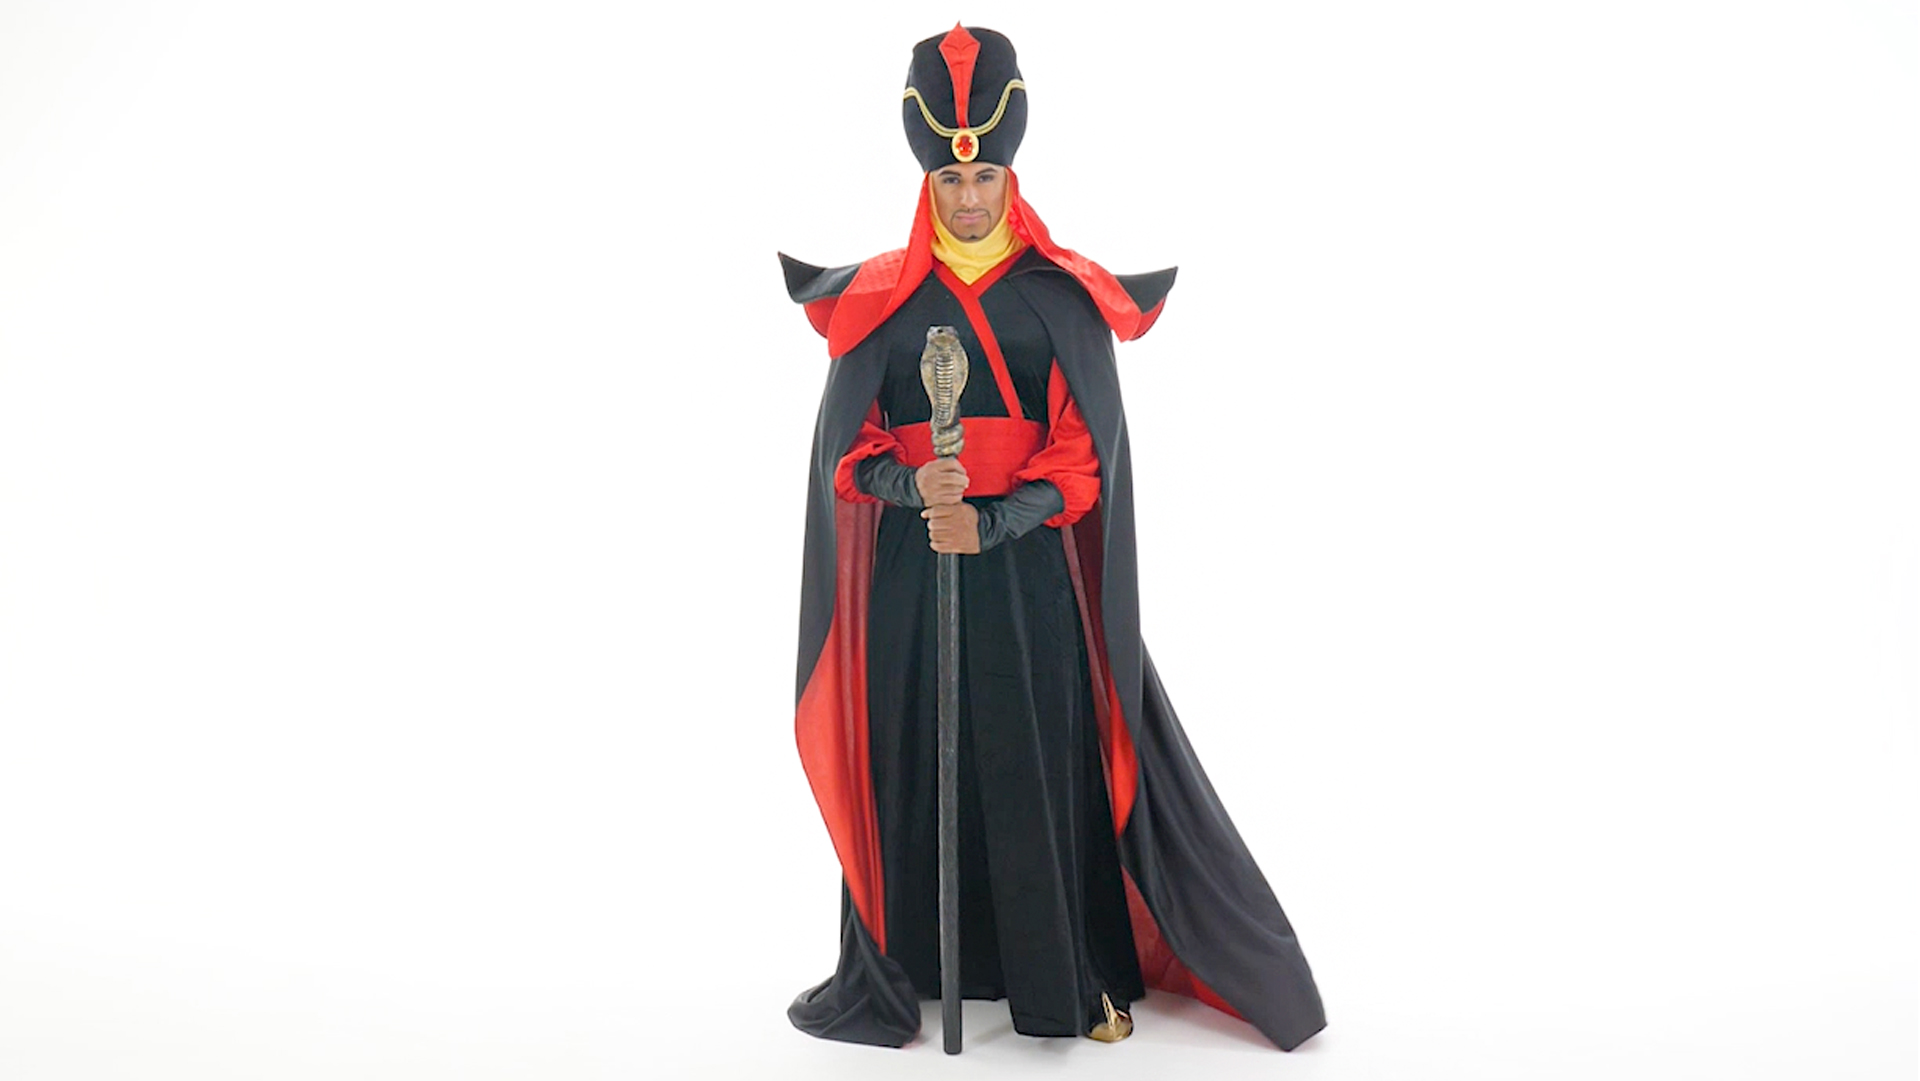 Get in touch with your villainous side when you wear this licensed exclusive Disney Aladdin Jafar Men's Costume.